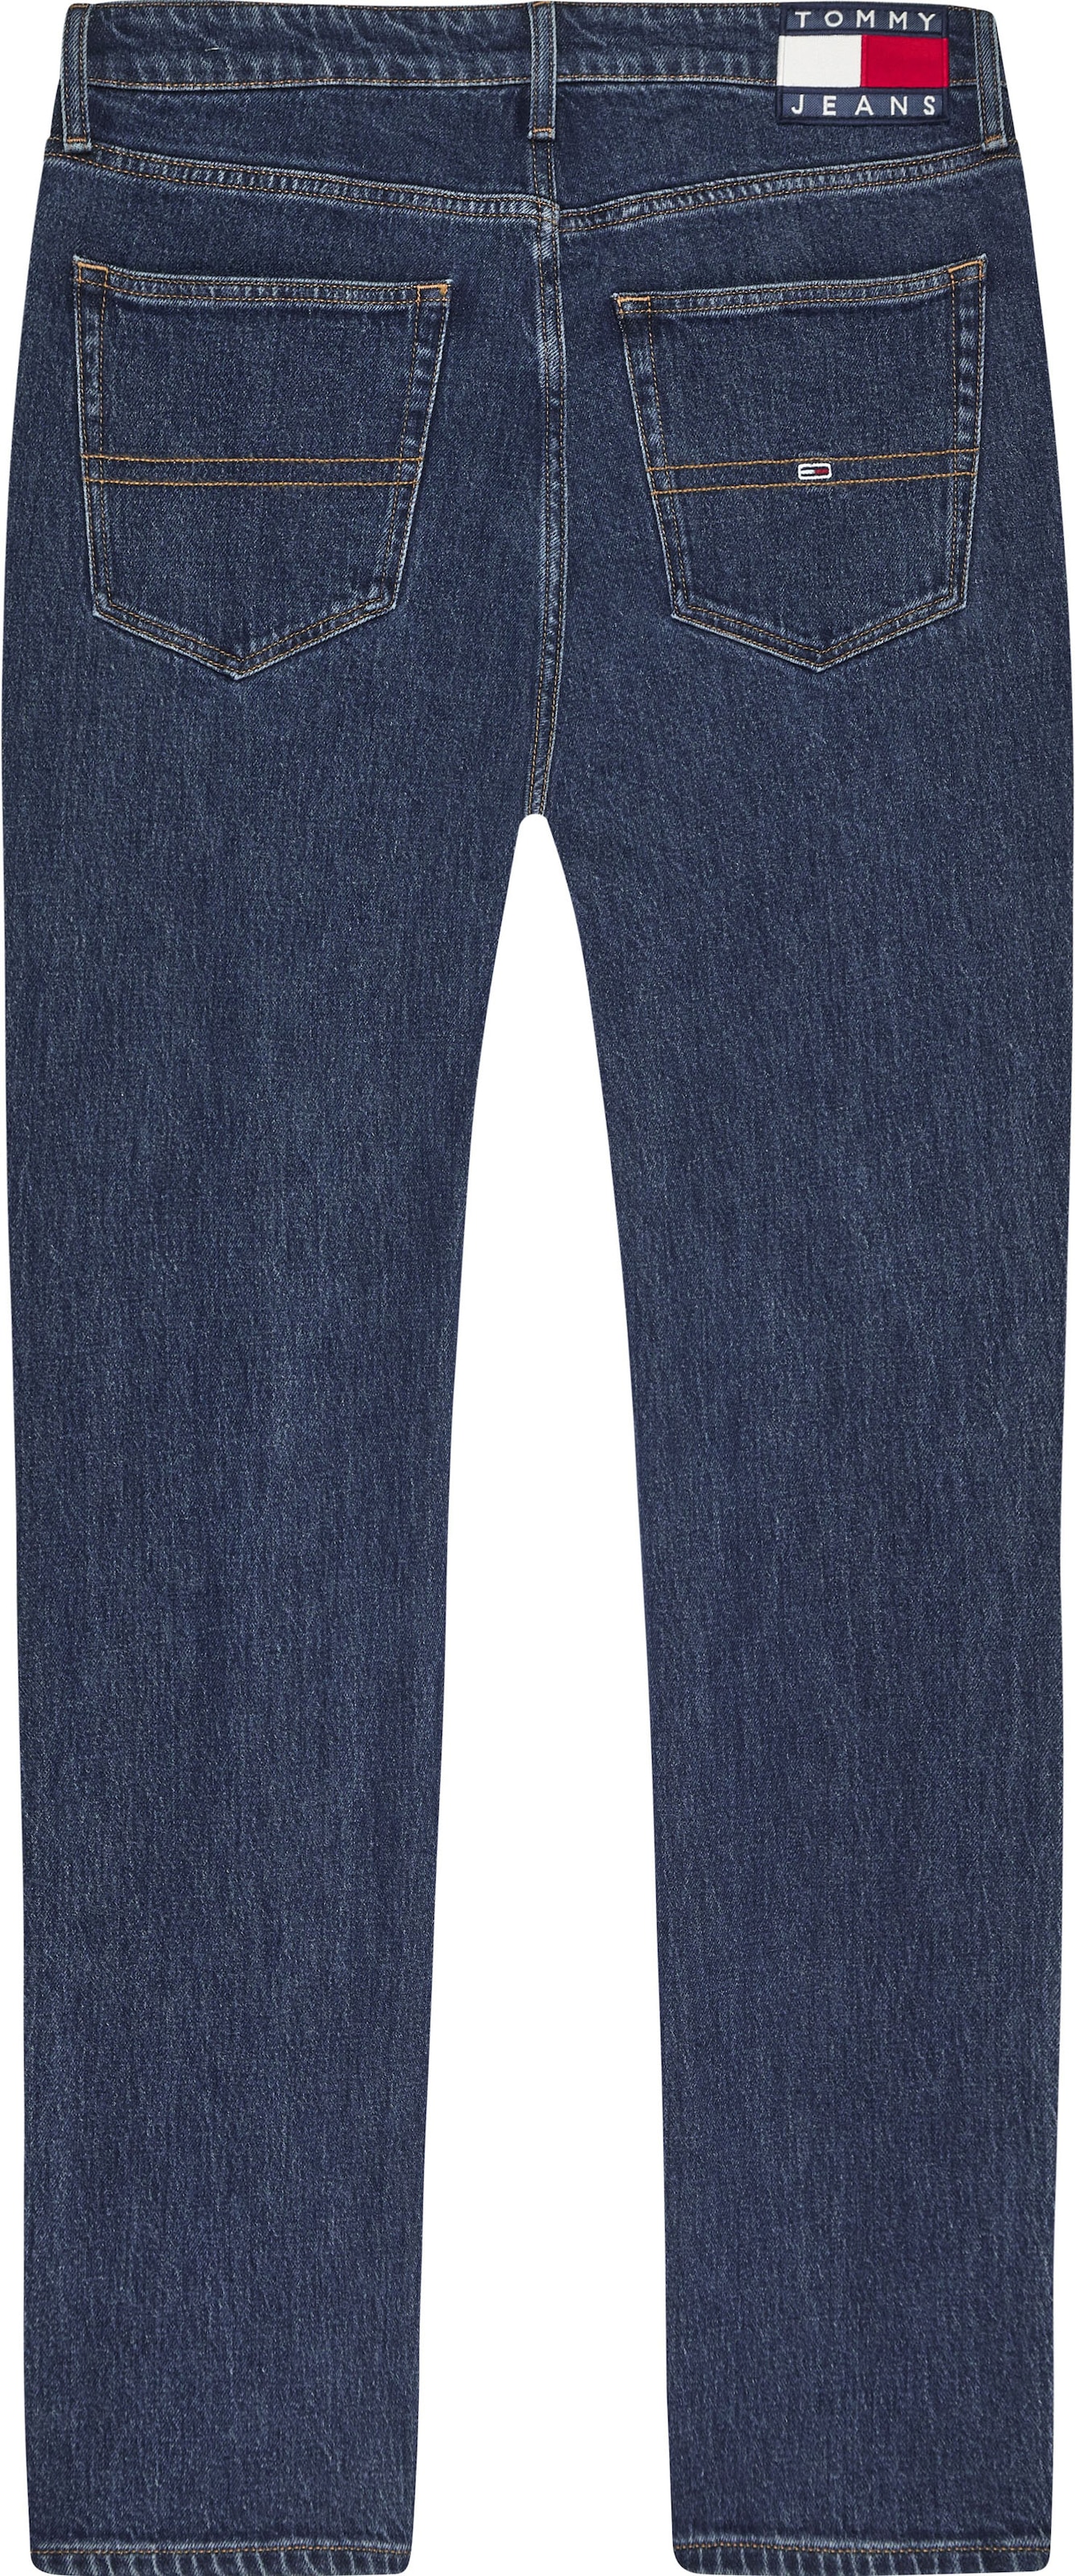 Tommy Jeans Straight-Jeans mit »RYAN Stitching RGLR ♕ bei Jeans Münzfach STRGHT«, am Tommy